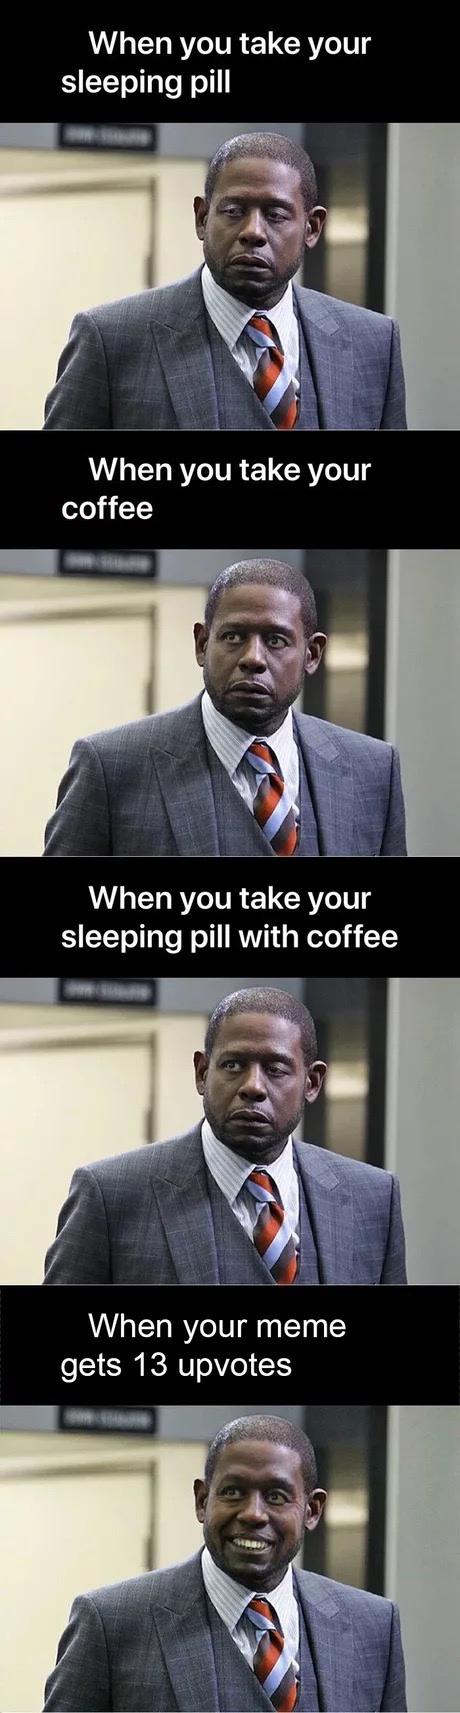 suit - When you take your sleeping pill When you take your coffee When you take your sleeping pill with coffee When your meme gets 13 upvotes